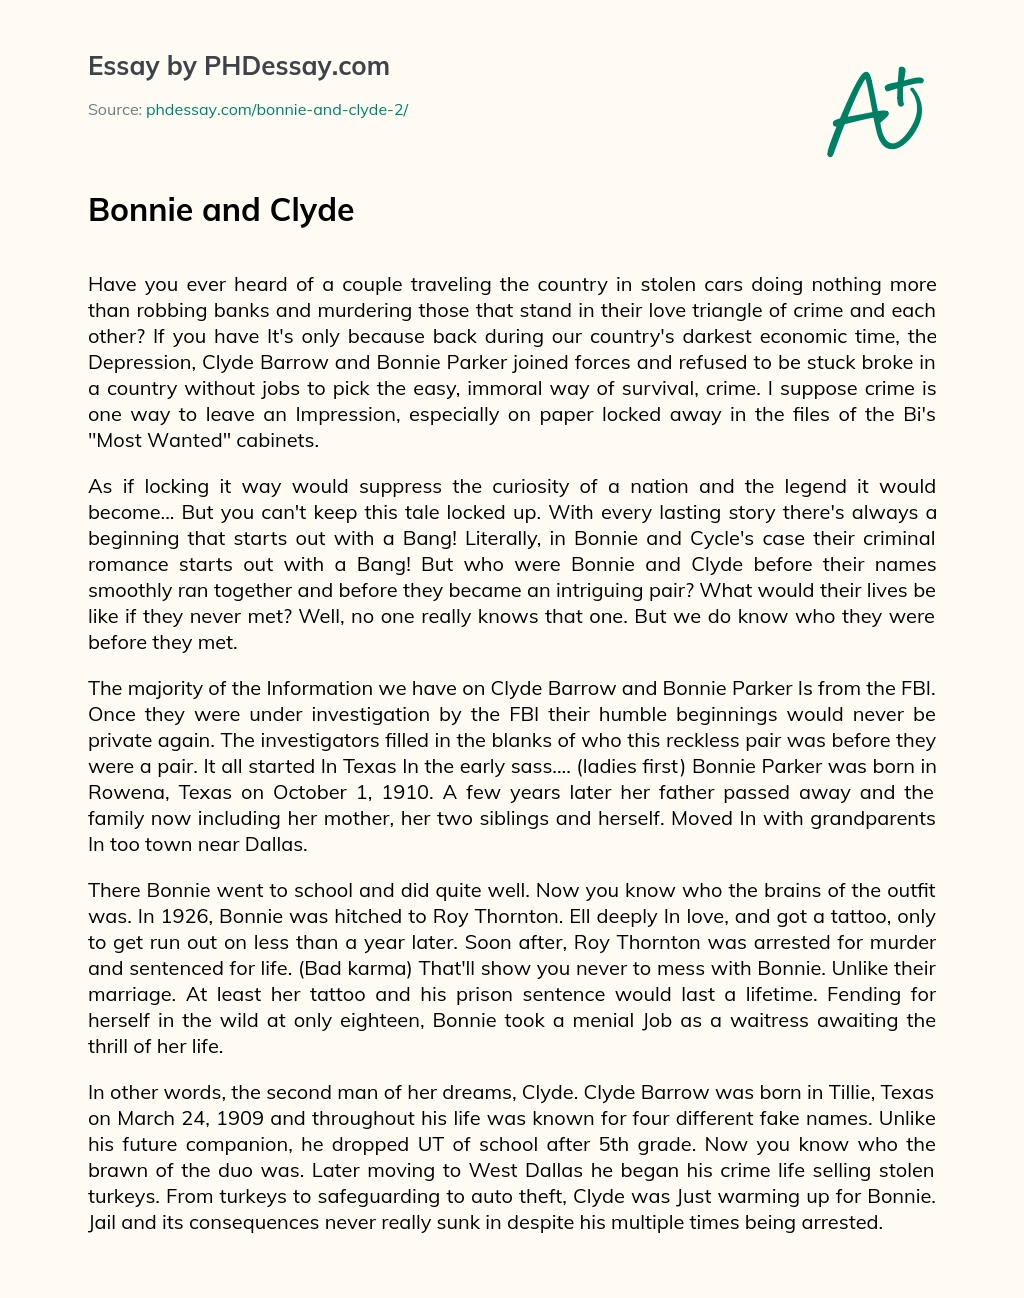 Bonnie and Clyde essay